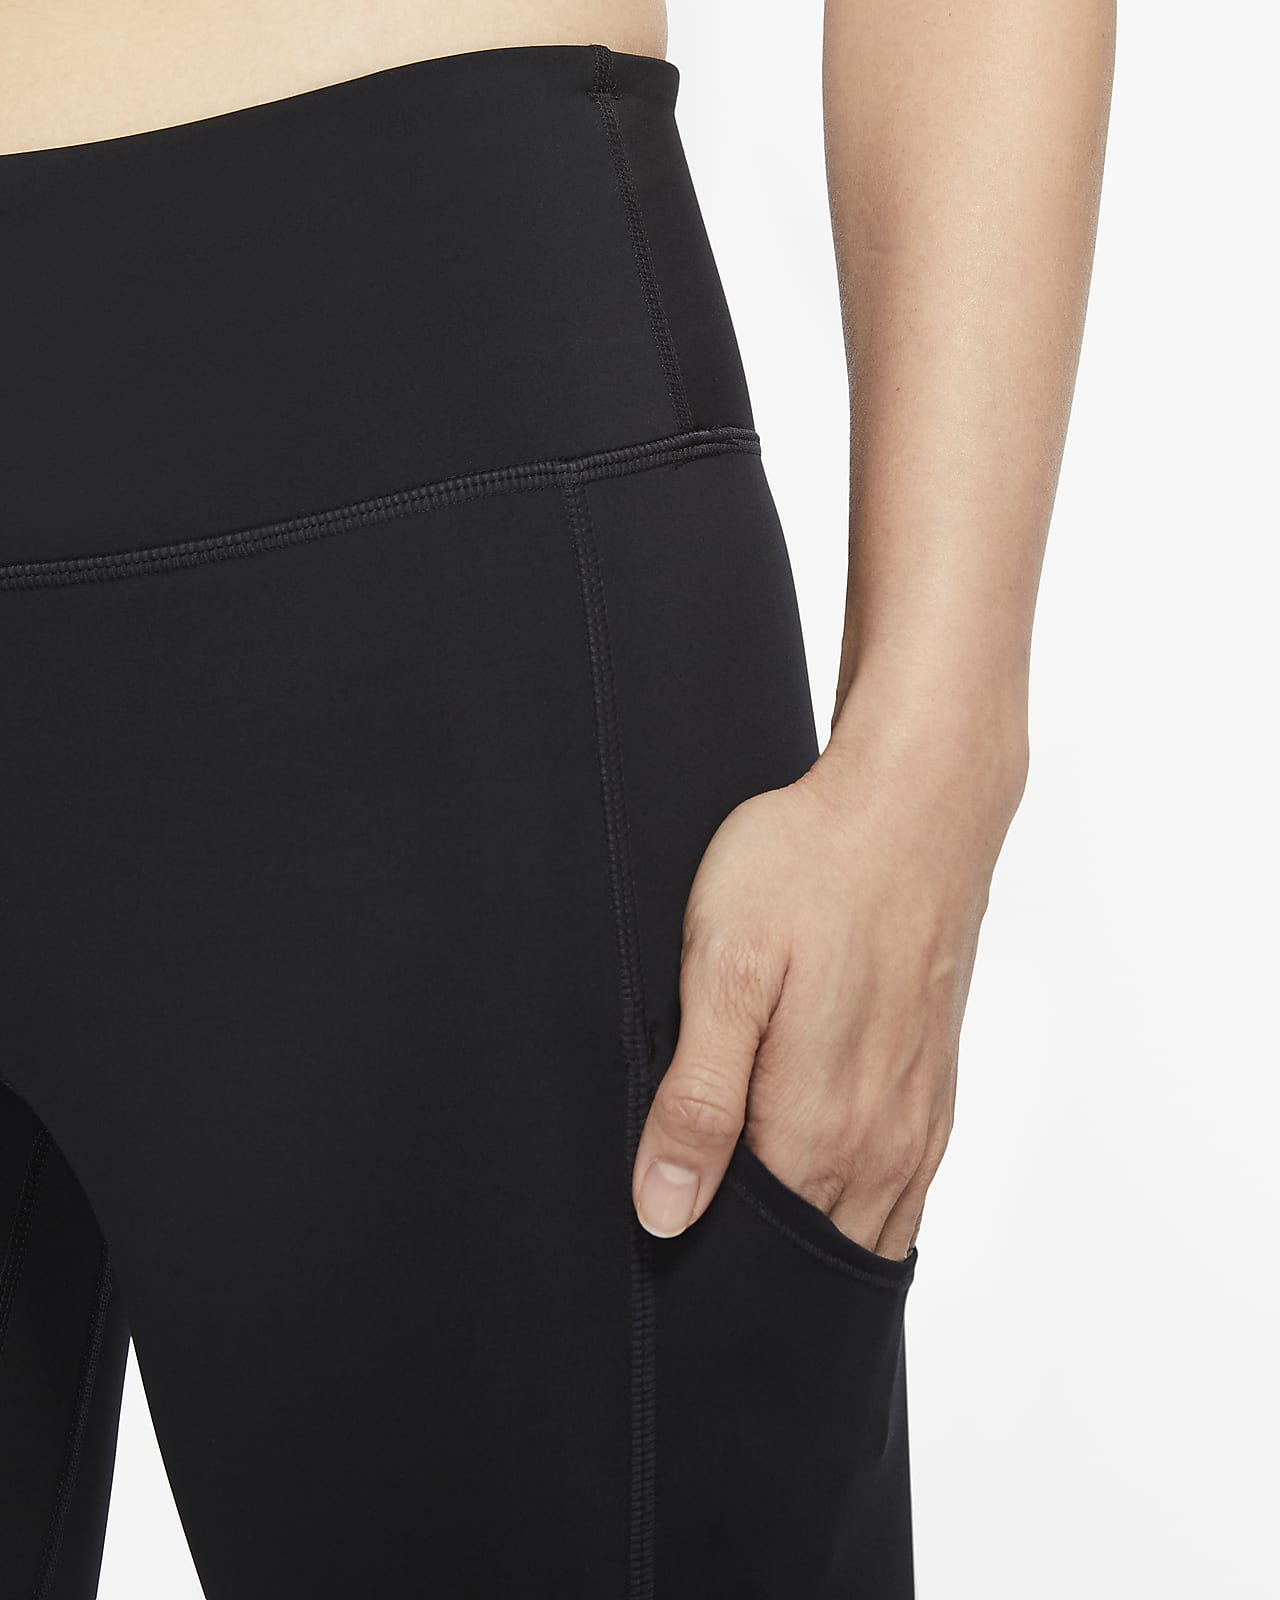 Nike Epic Lux Women's Running Tights-Black